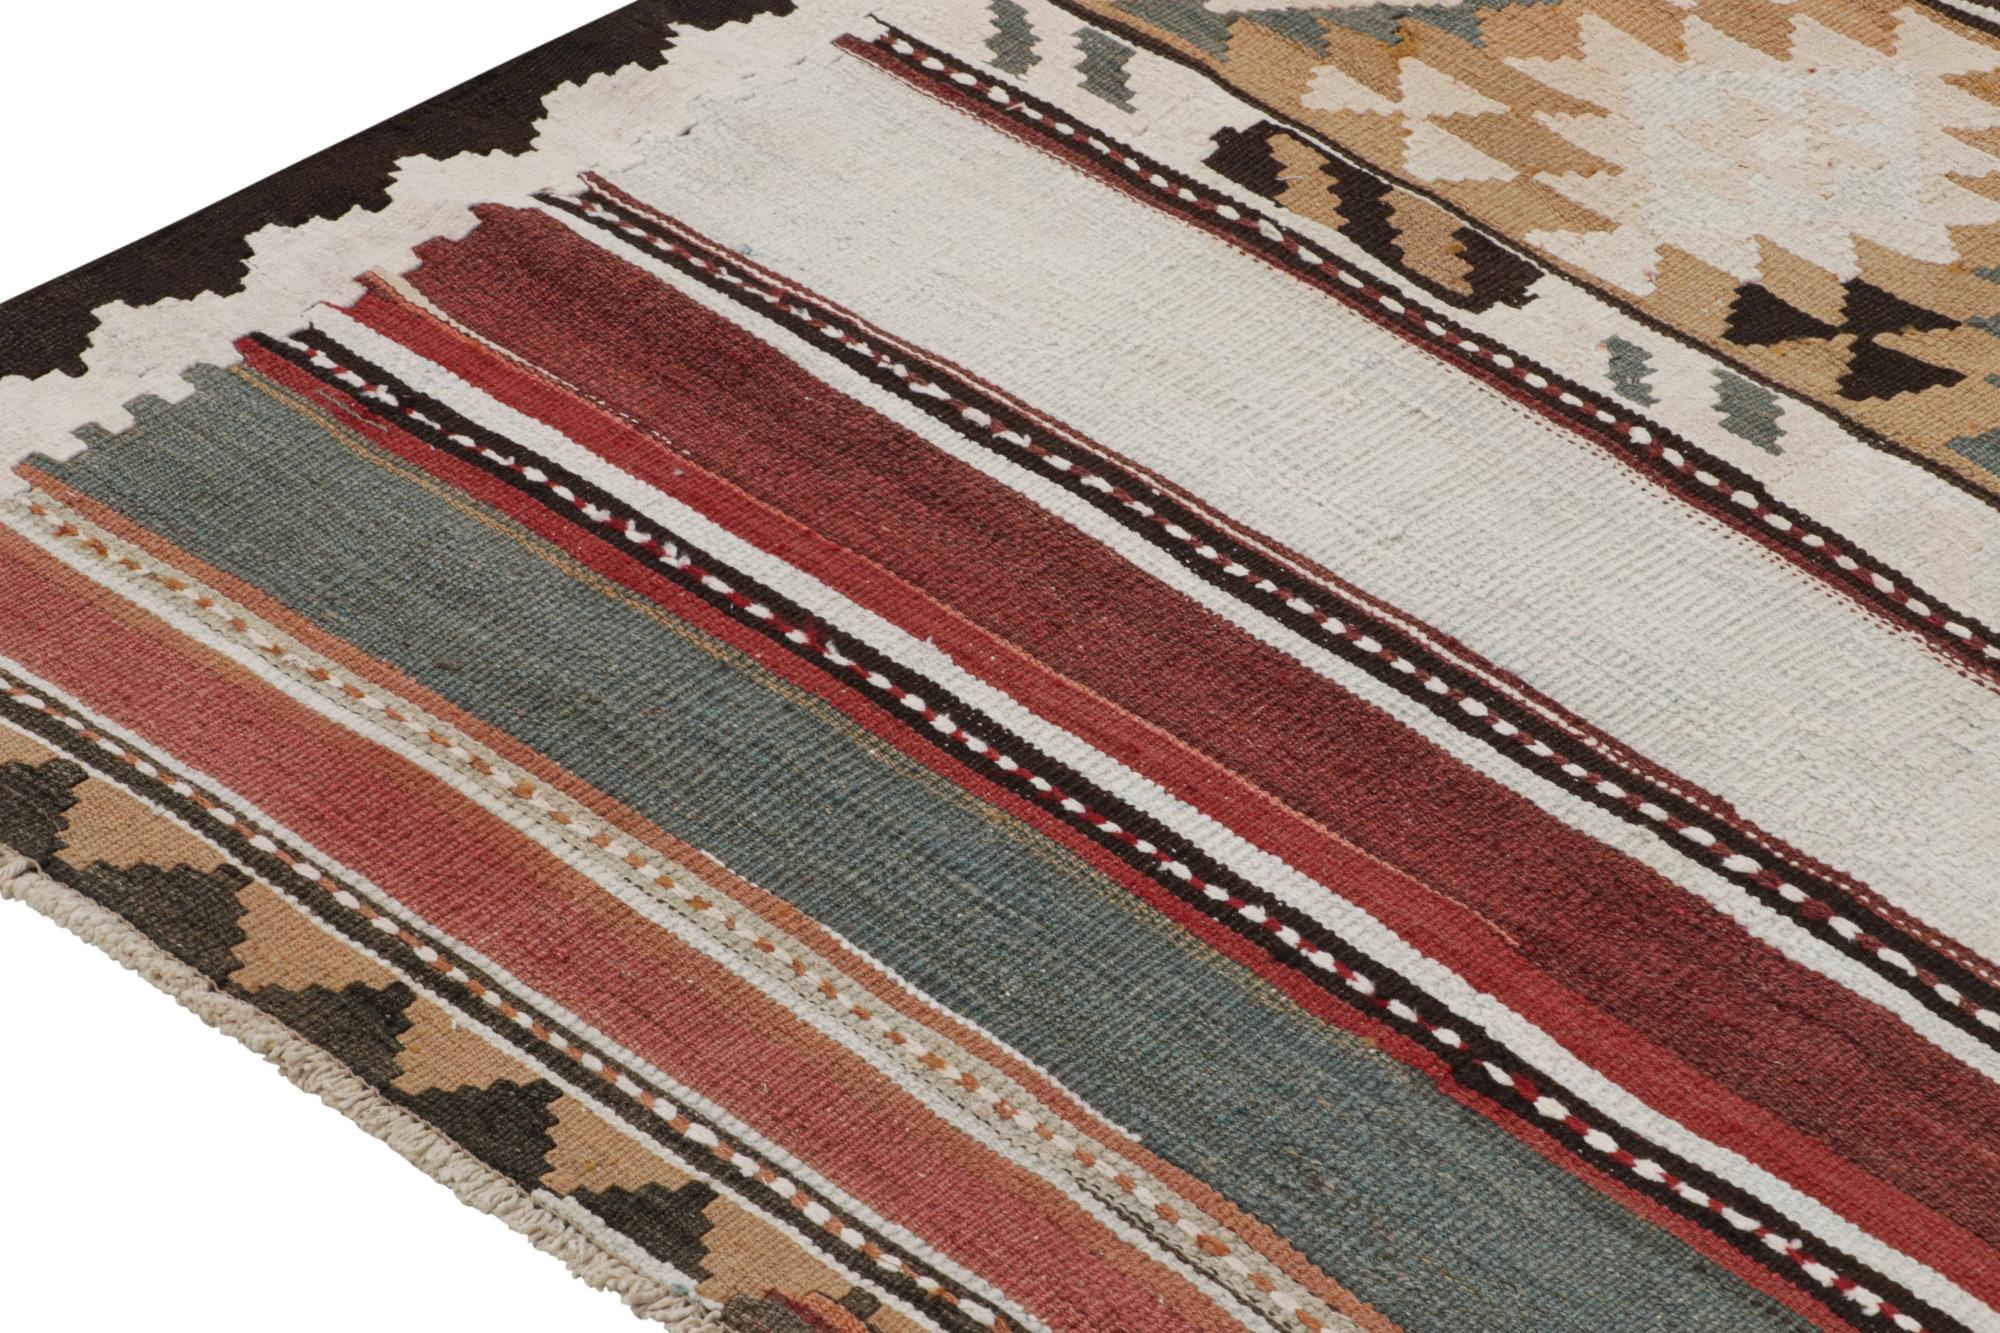 Mid-20th Century Vintage Shahsavan Persian Kilim in Red, White and Beige-Brown Geometric Patterns For Sale